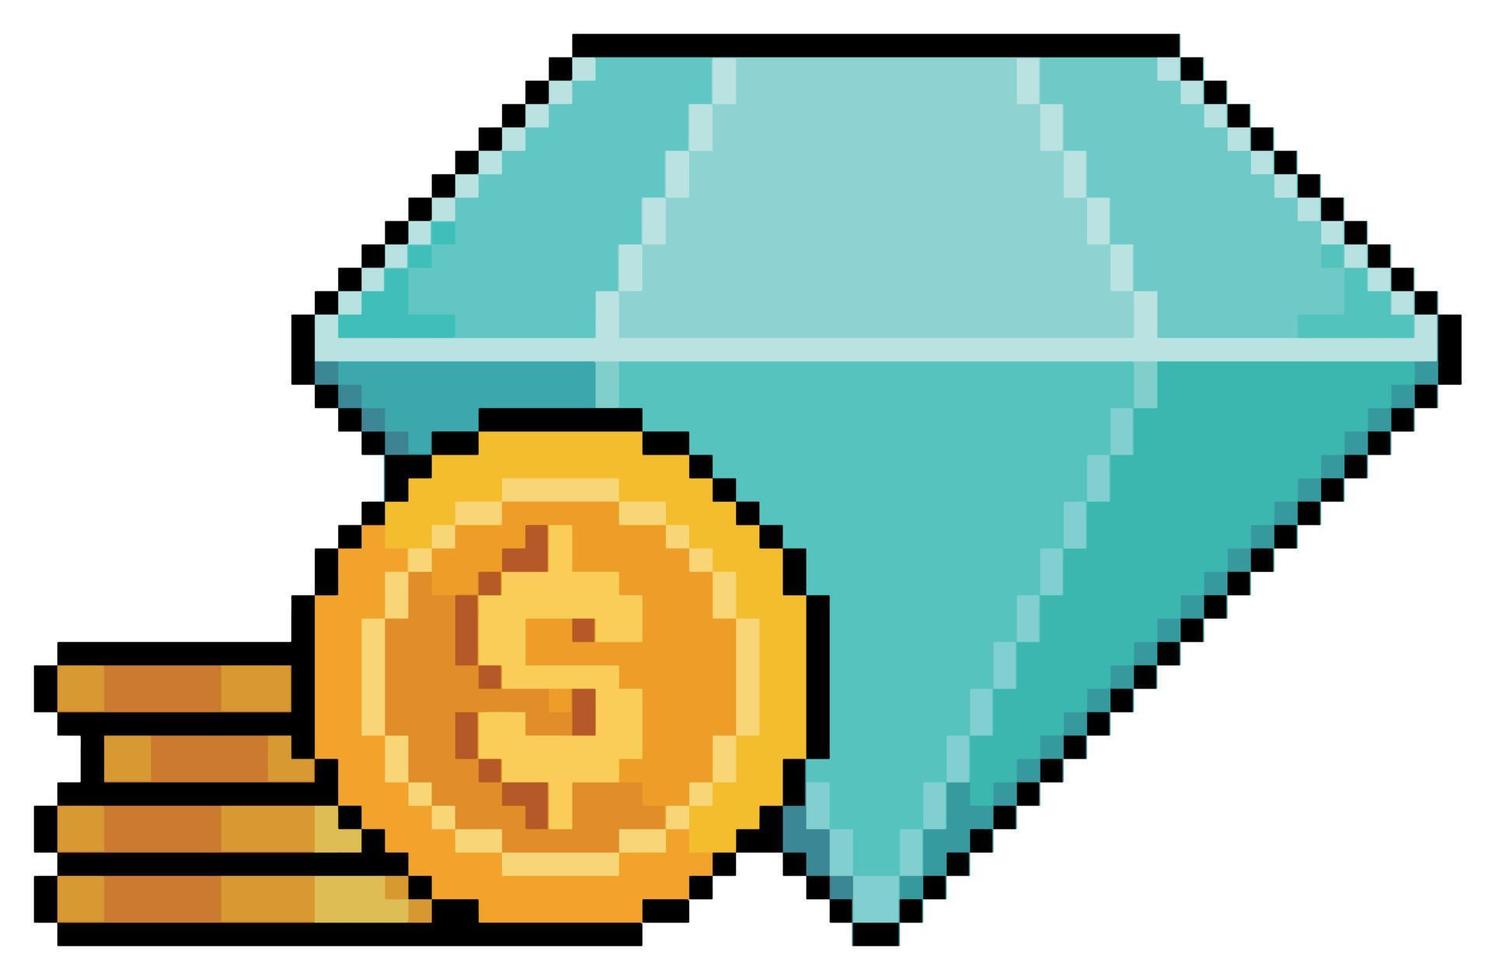 Pixel art diamond and coins. gemstone and money vector icon for 8bit game on white background